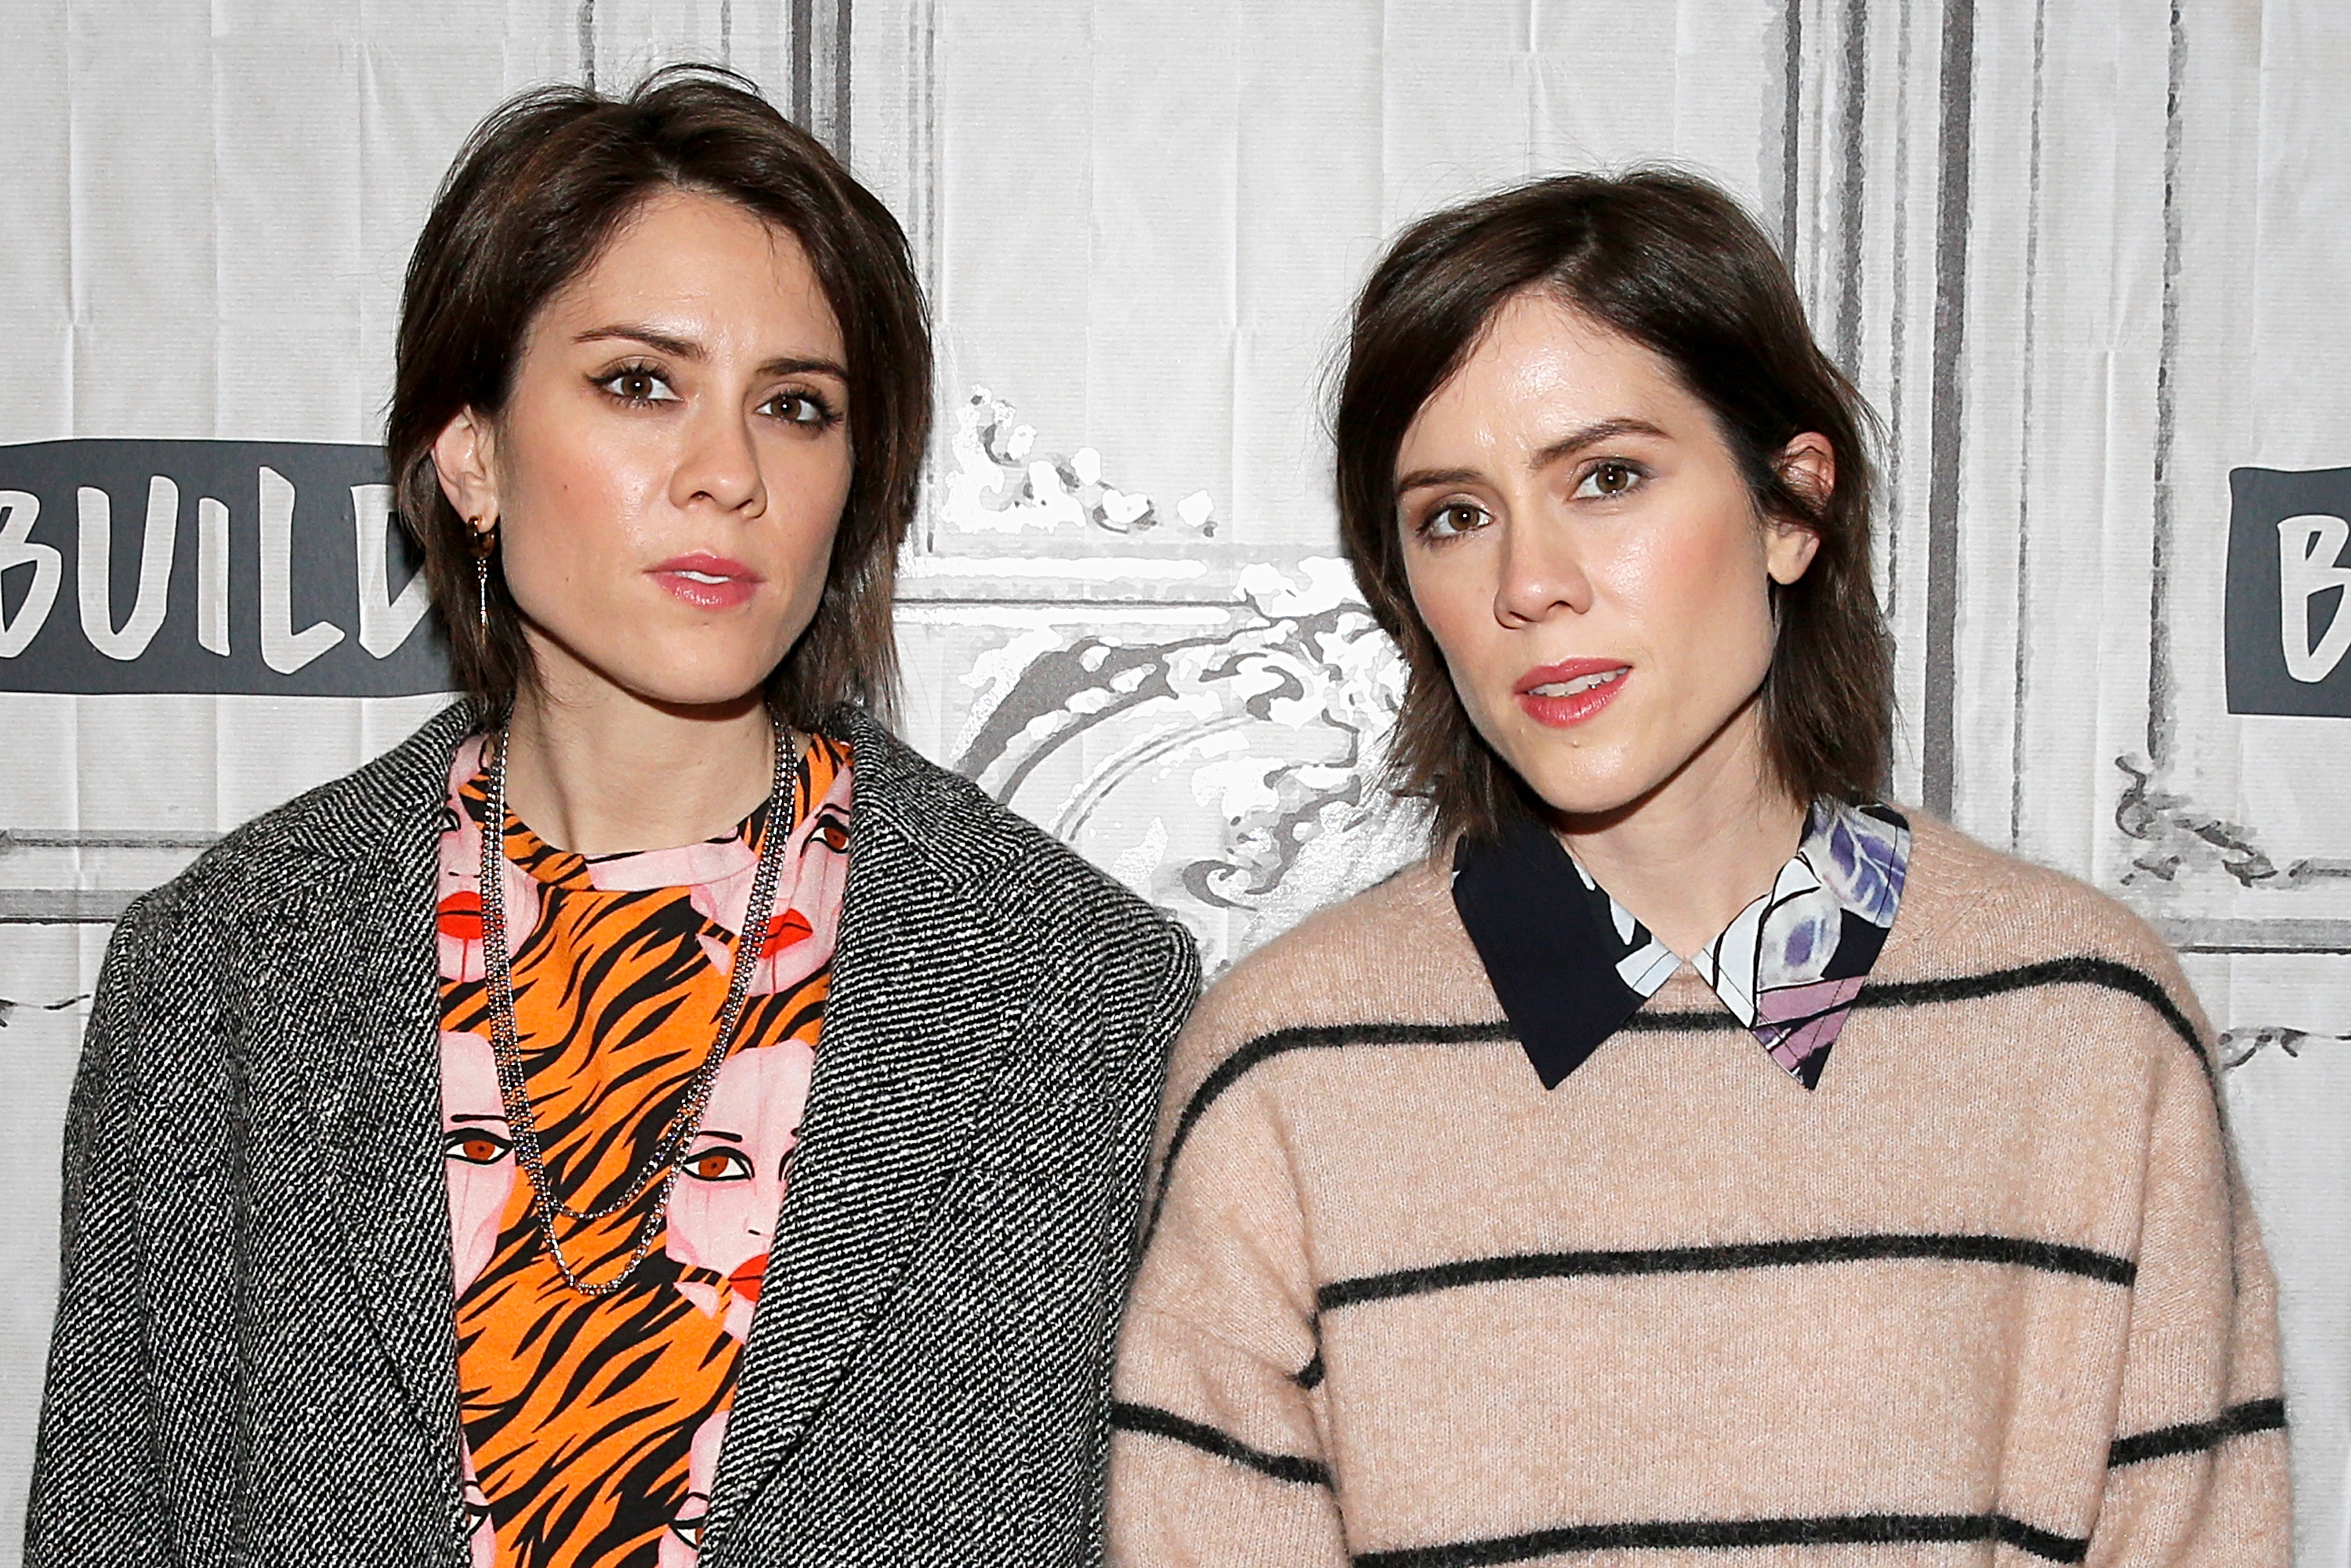 Tegan Quin: ‘This Era of Tegan and Sara Is Very About What We Want’